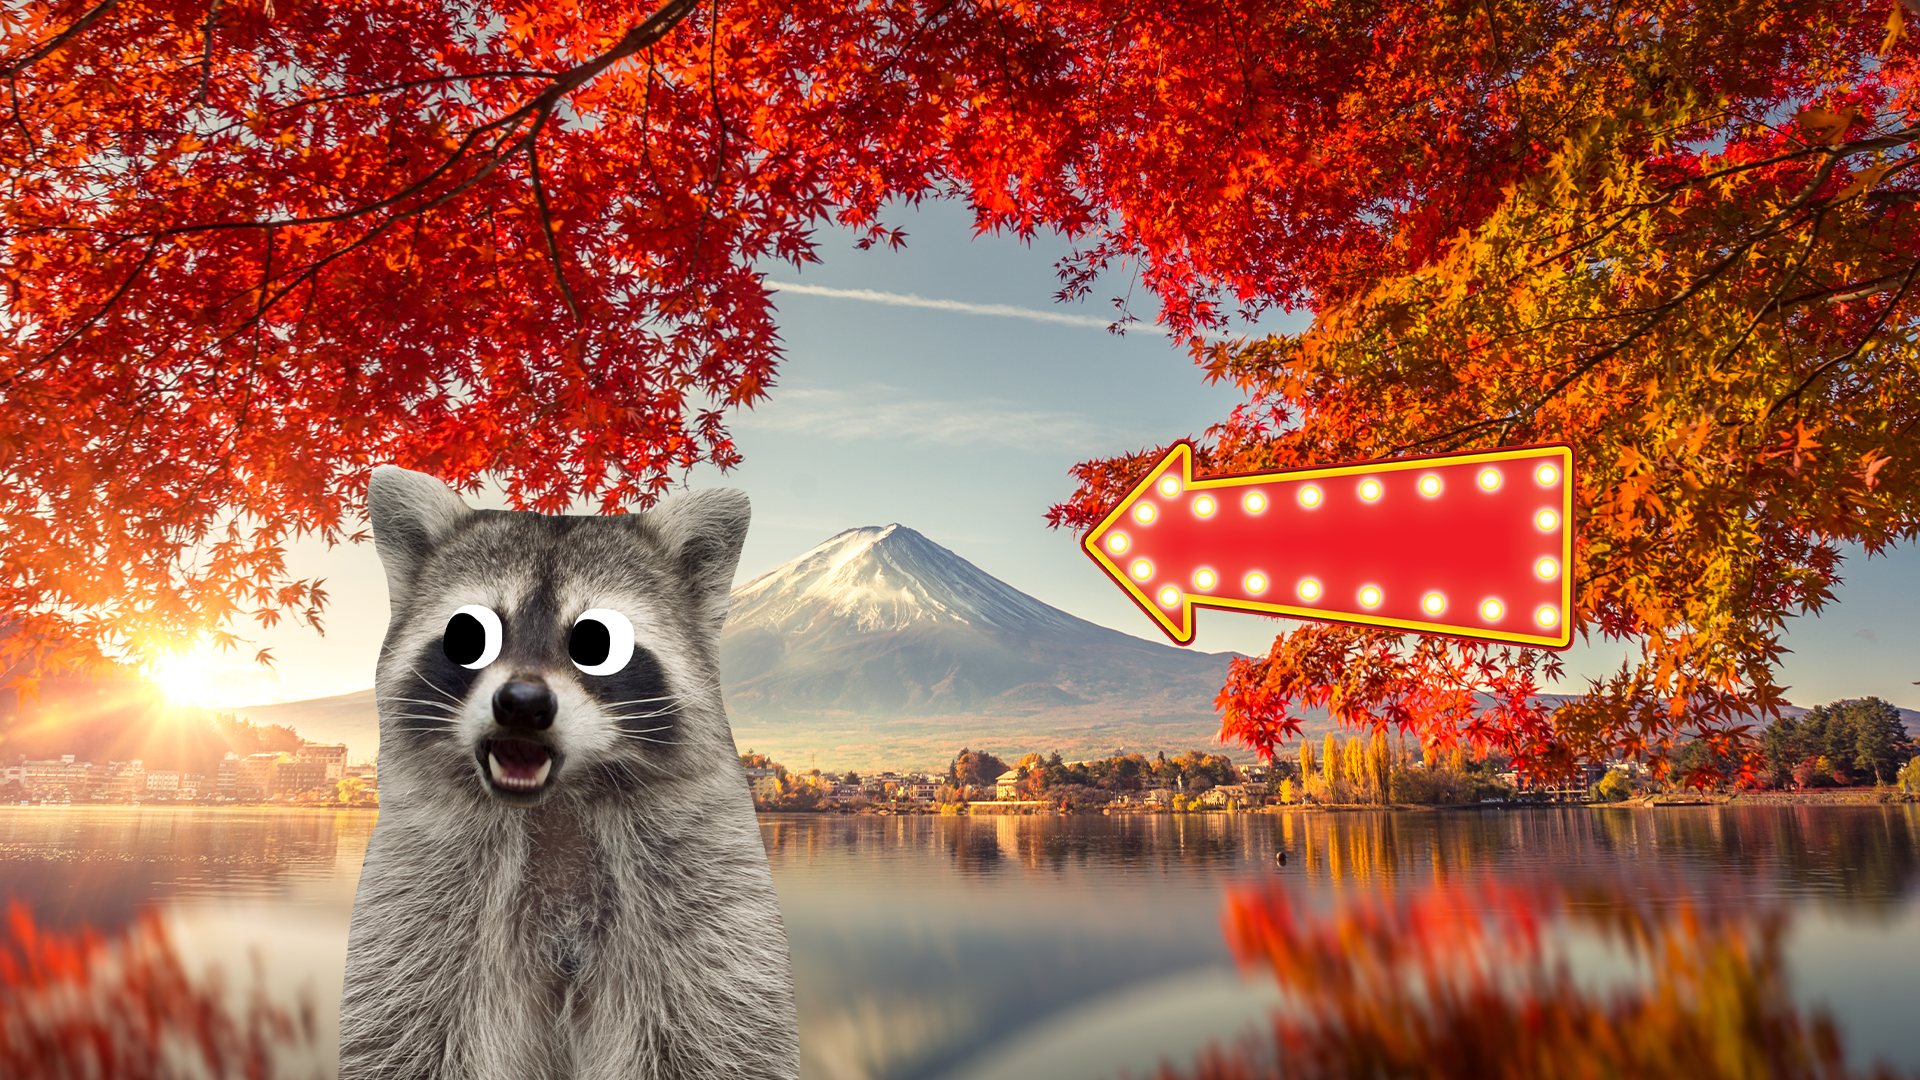 Raccoon and arrow with mountain and lake